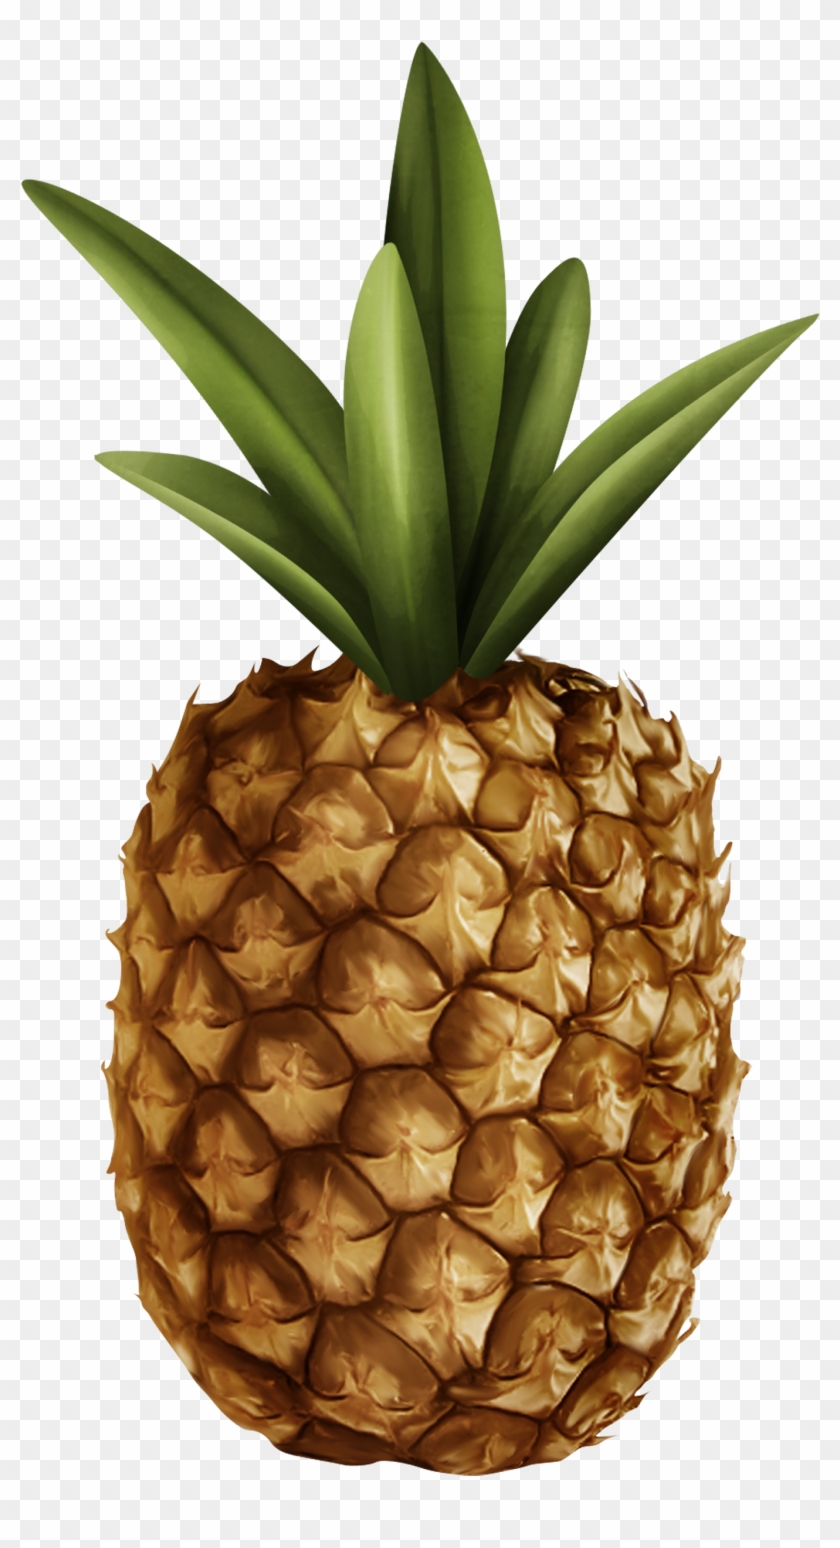 Pineapple Png Clipart - Pineapple #402948